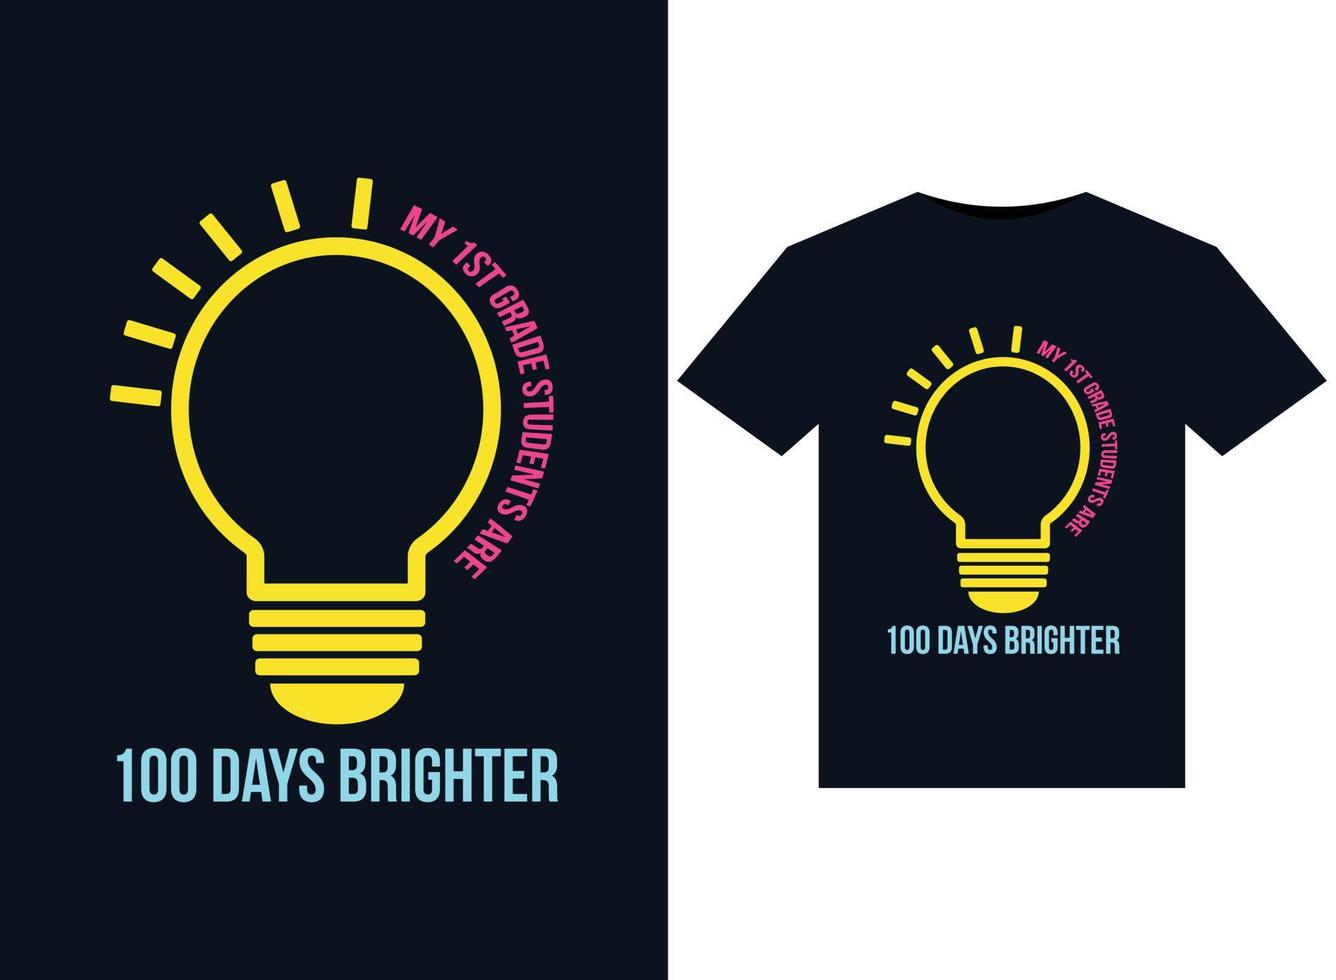 My 1st Grade students are 100 days brighter illustrations for print-ready T-Shirts design vector